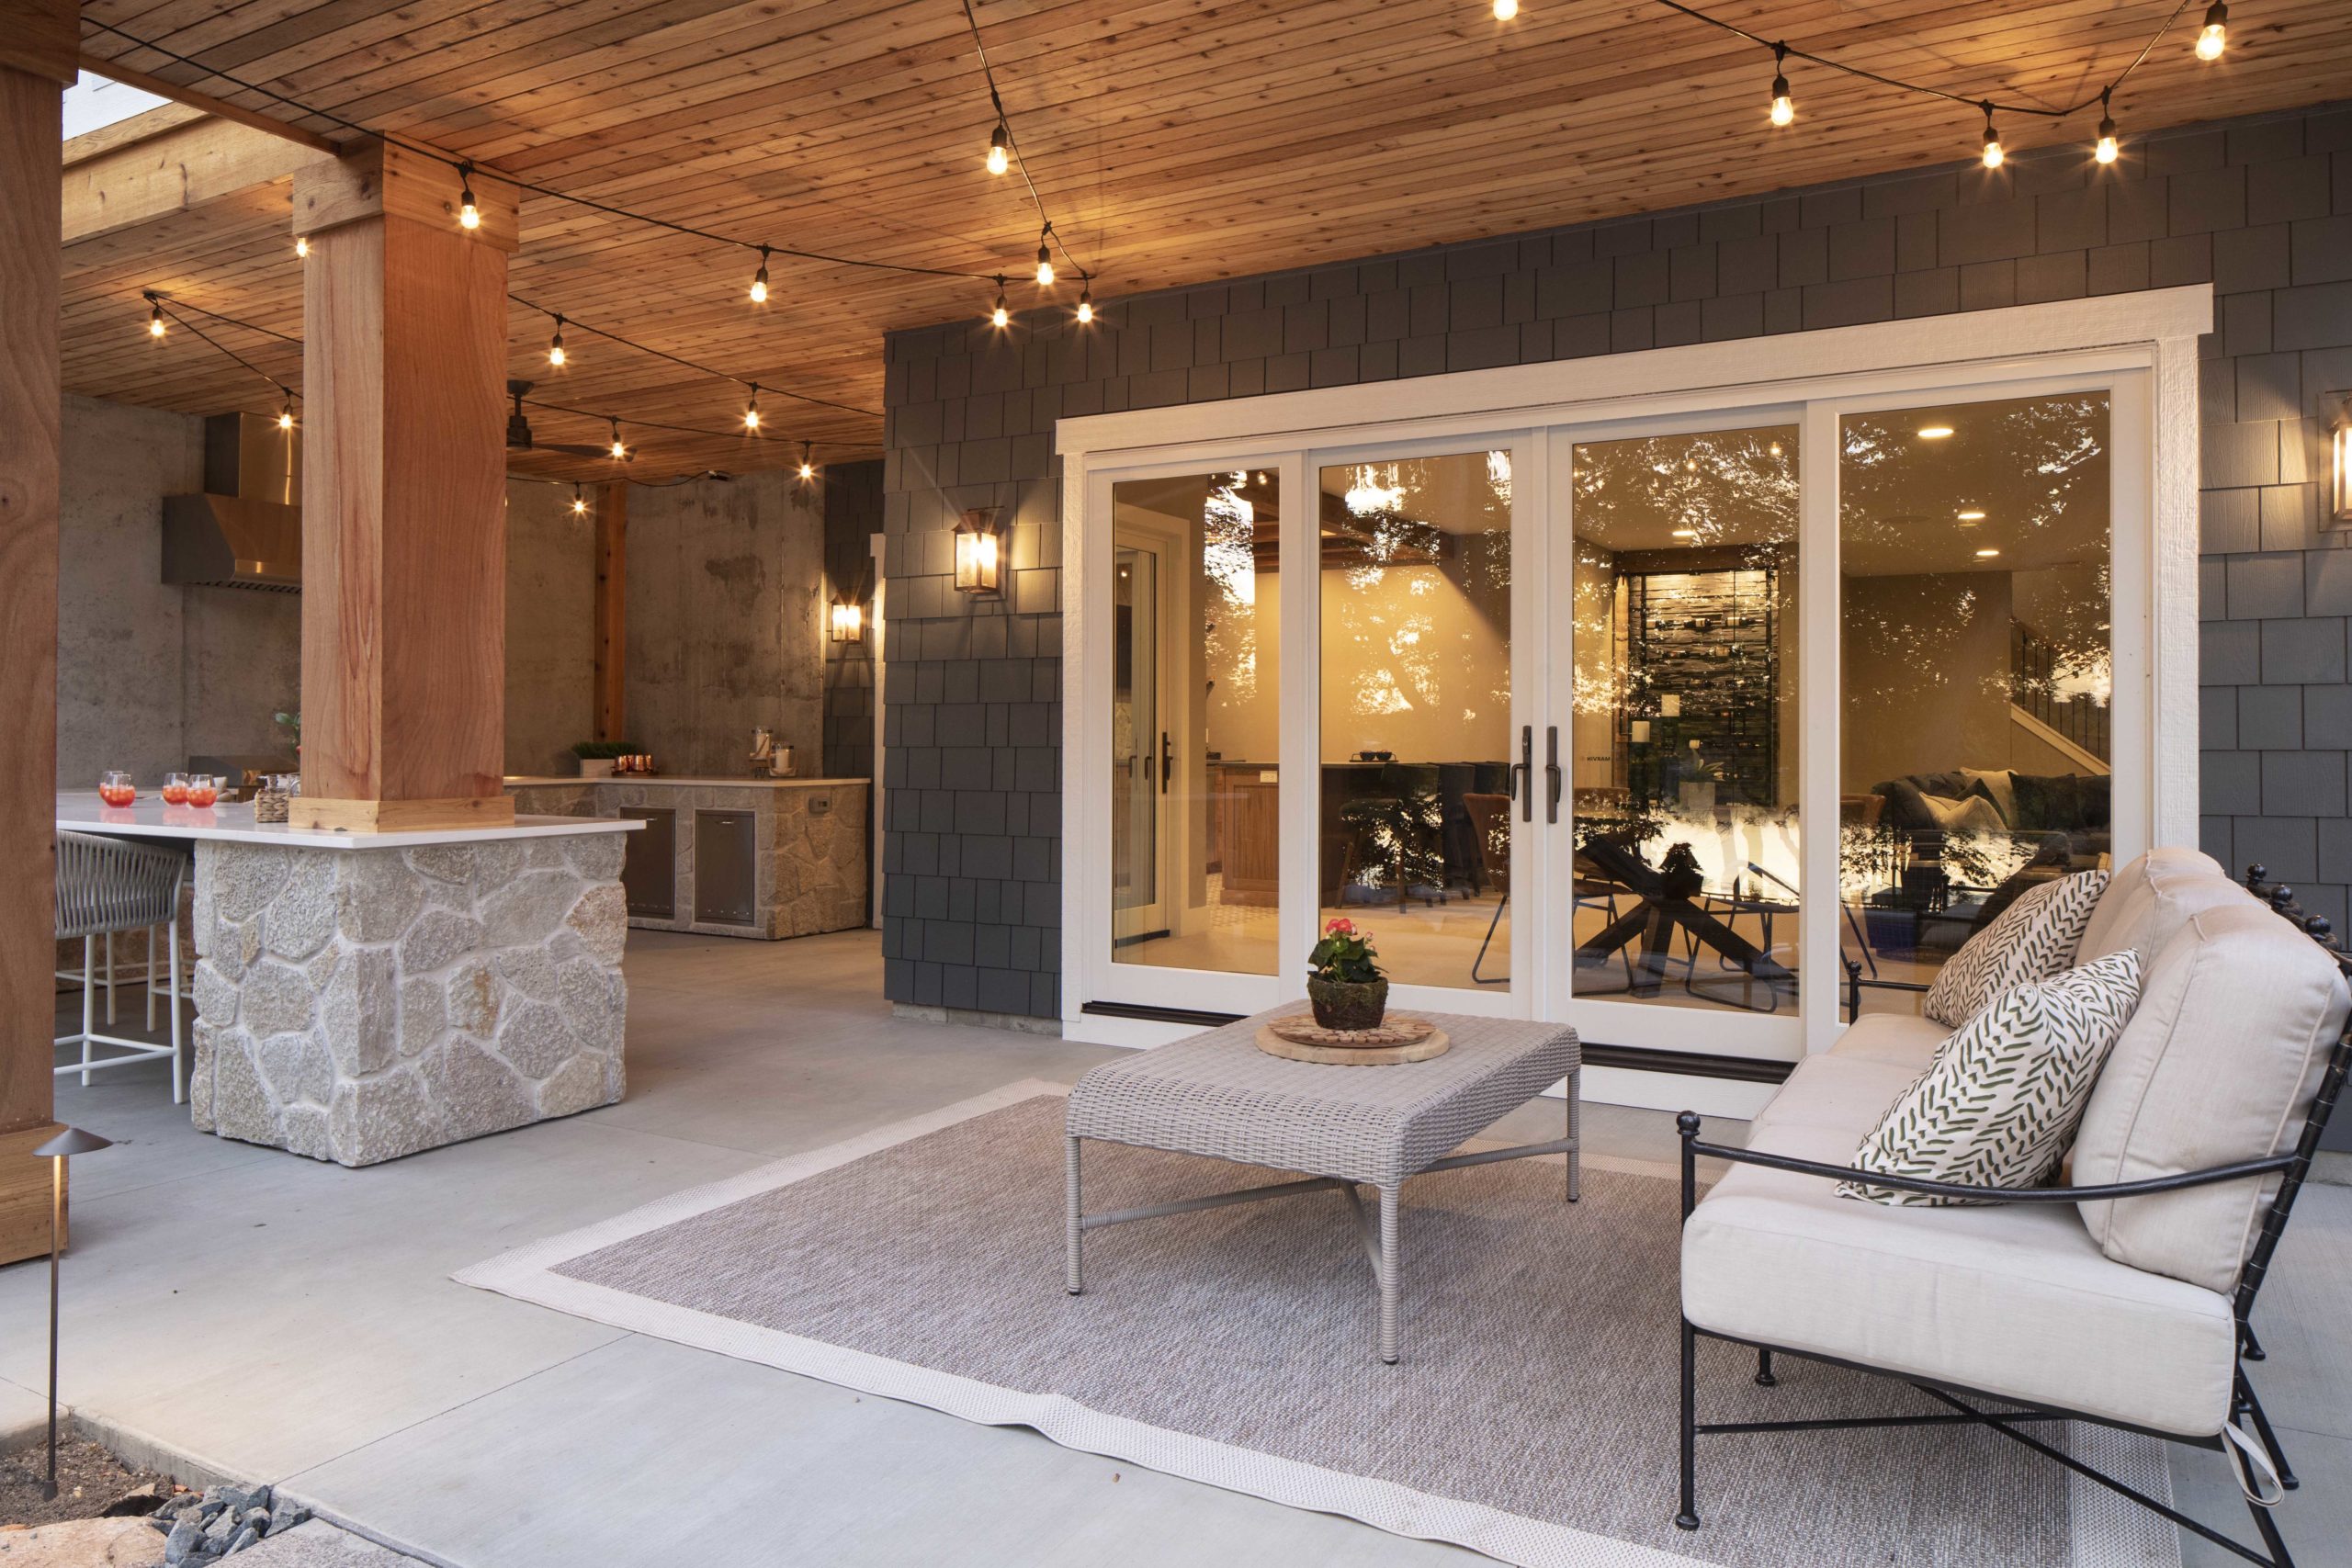 A custom lake home build with an outdoor living area featuring a fireplace and string lights.